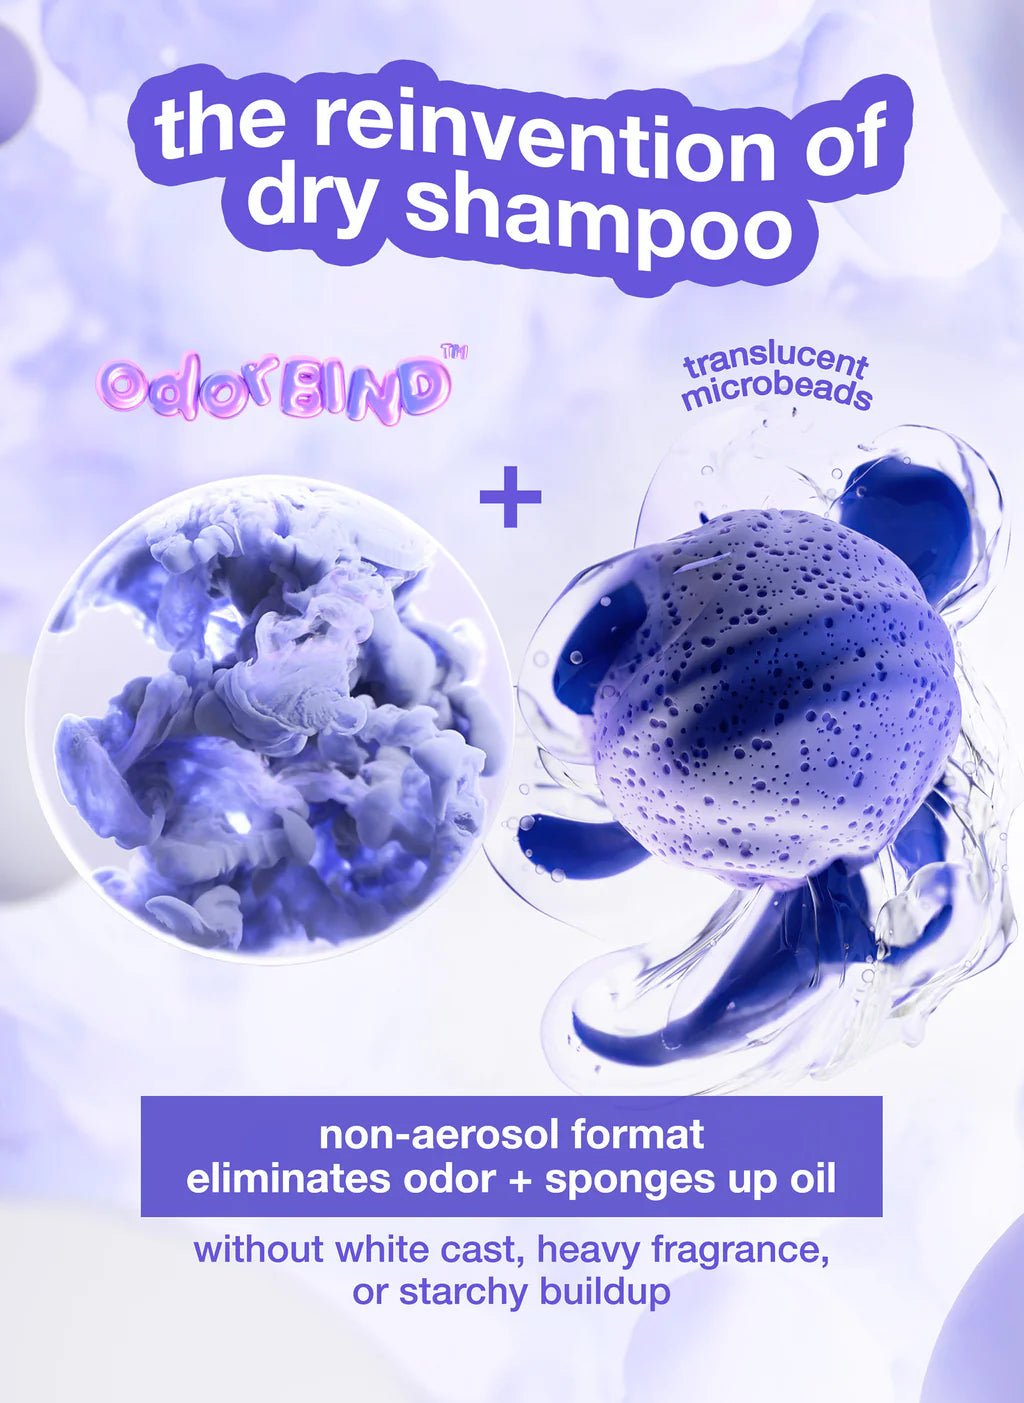 A promotional image for Simply Colour Hair Salon Studio & Online Store's K18 AirWash Dry Shampoo showcasing odorBIND biotechnology with translucent microbeads. Text emphasizes its non-aerosol format, odor elimination, and oil absorption without a white cast or heavy fragrance. Perfectly reduces oil for fresh, clean hair throughout the day.